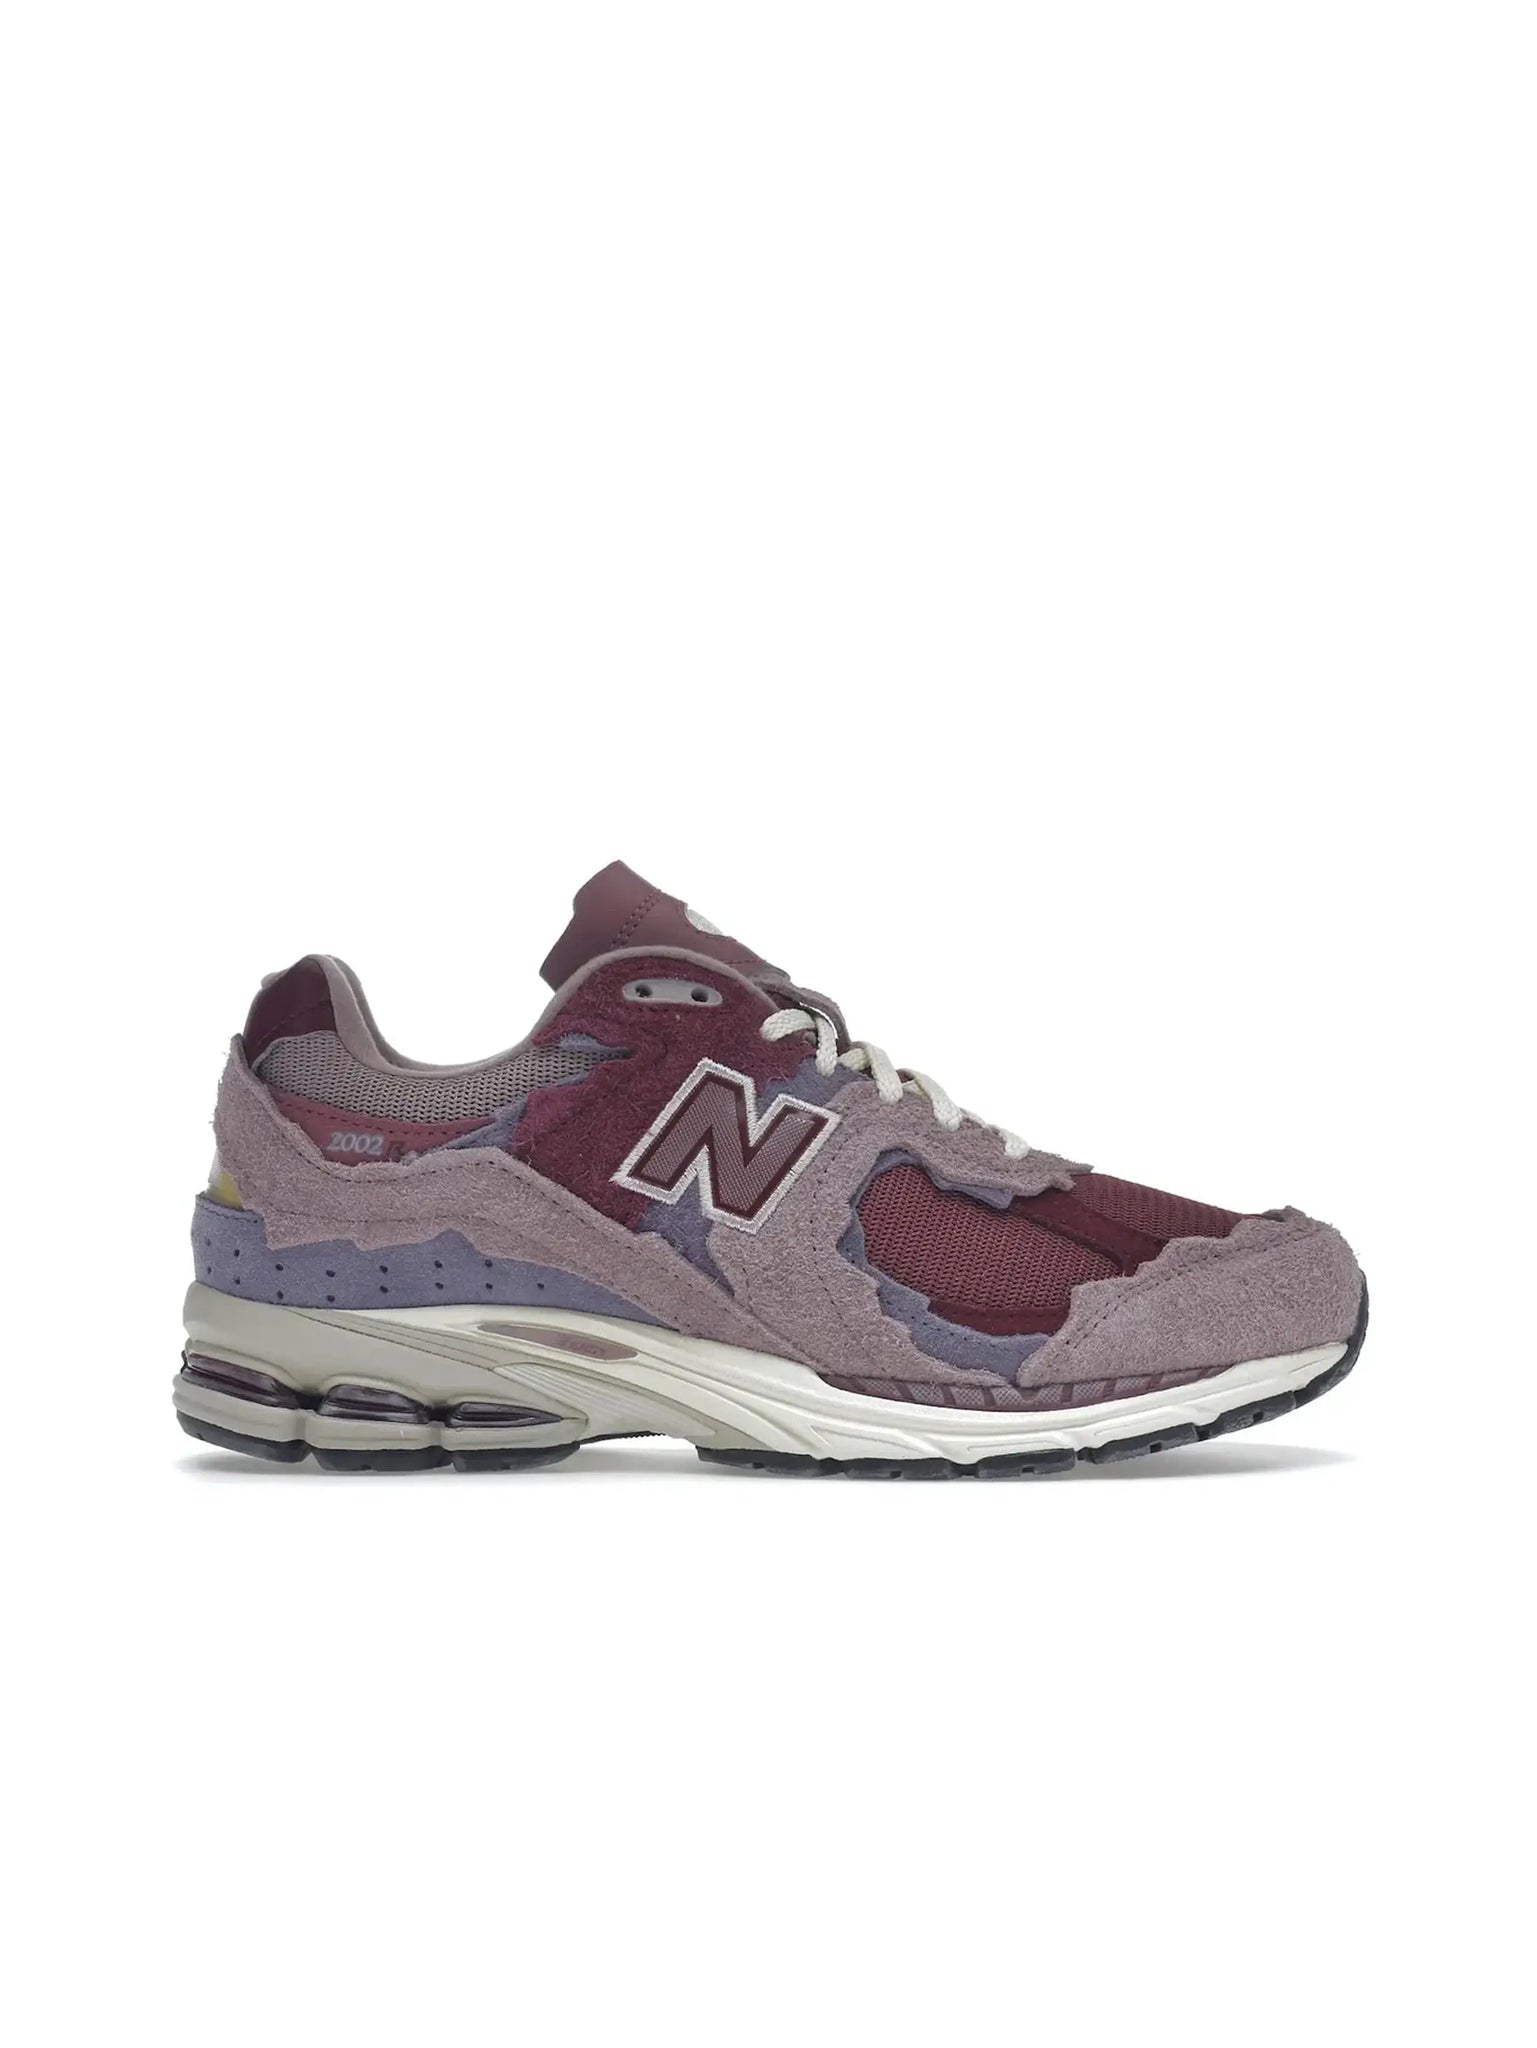 New Balance 2002R Protection Pack Pink in Melbourne, Australia - Prior